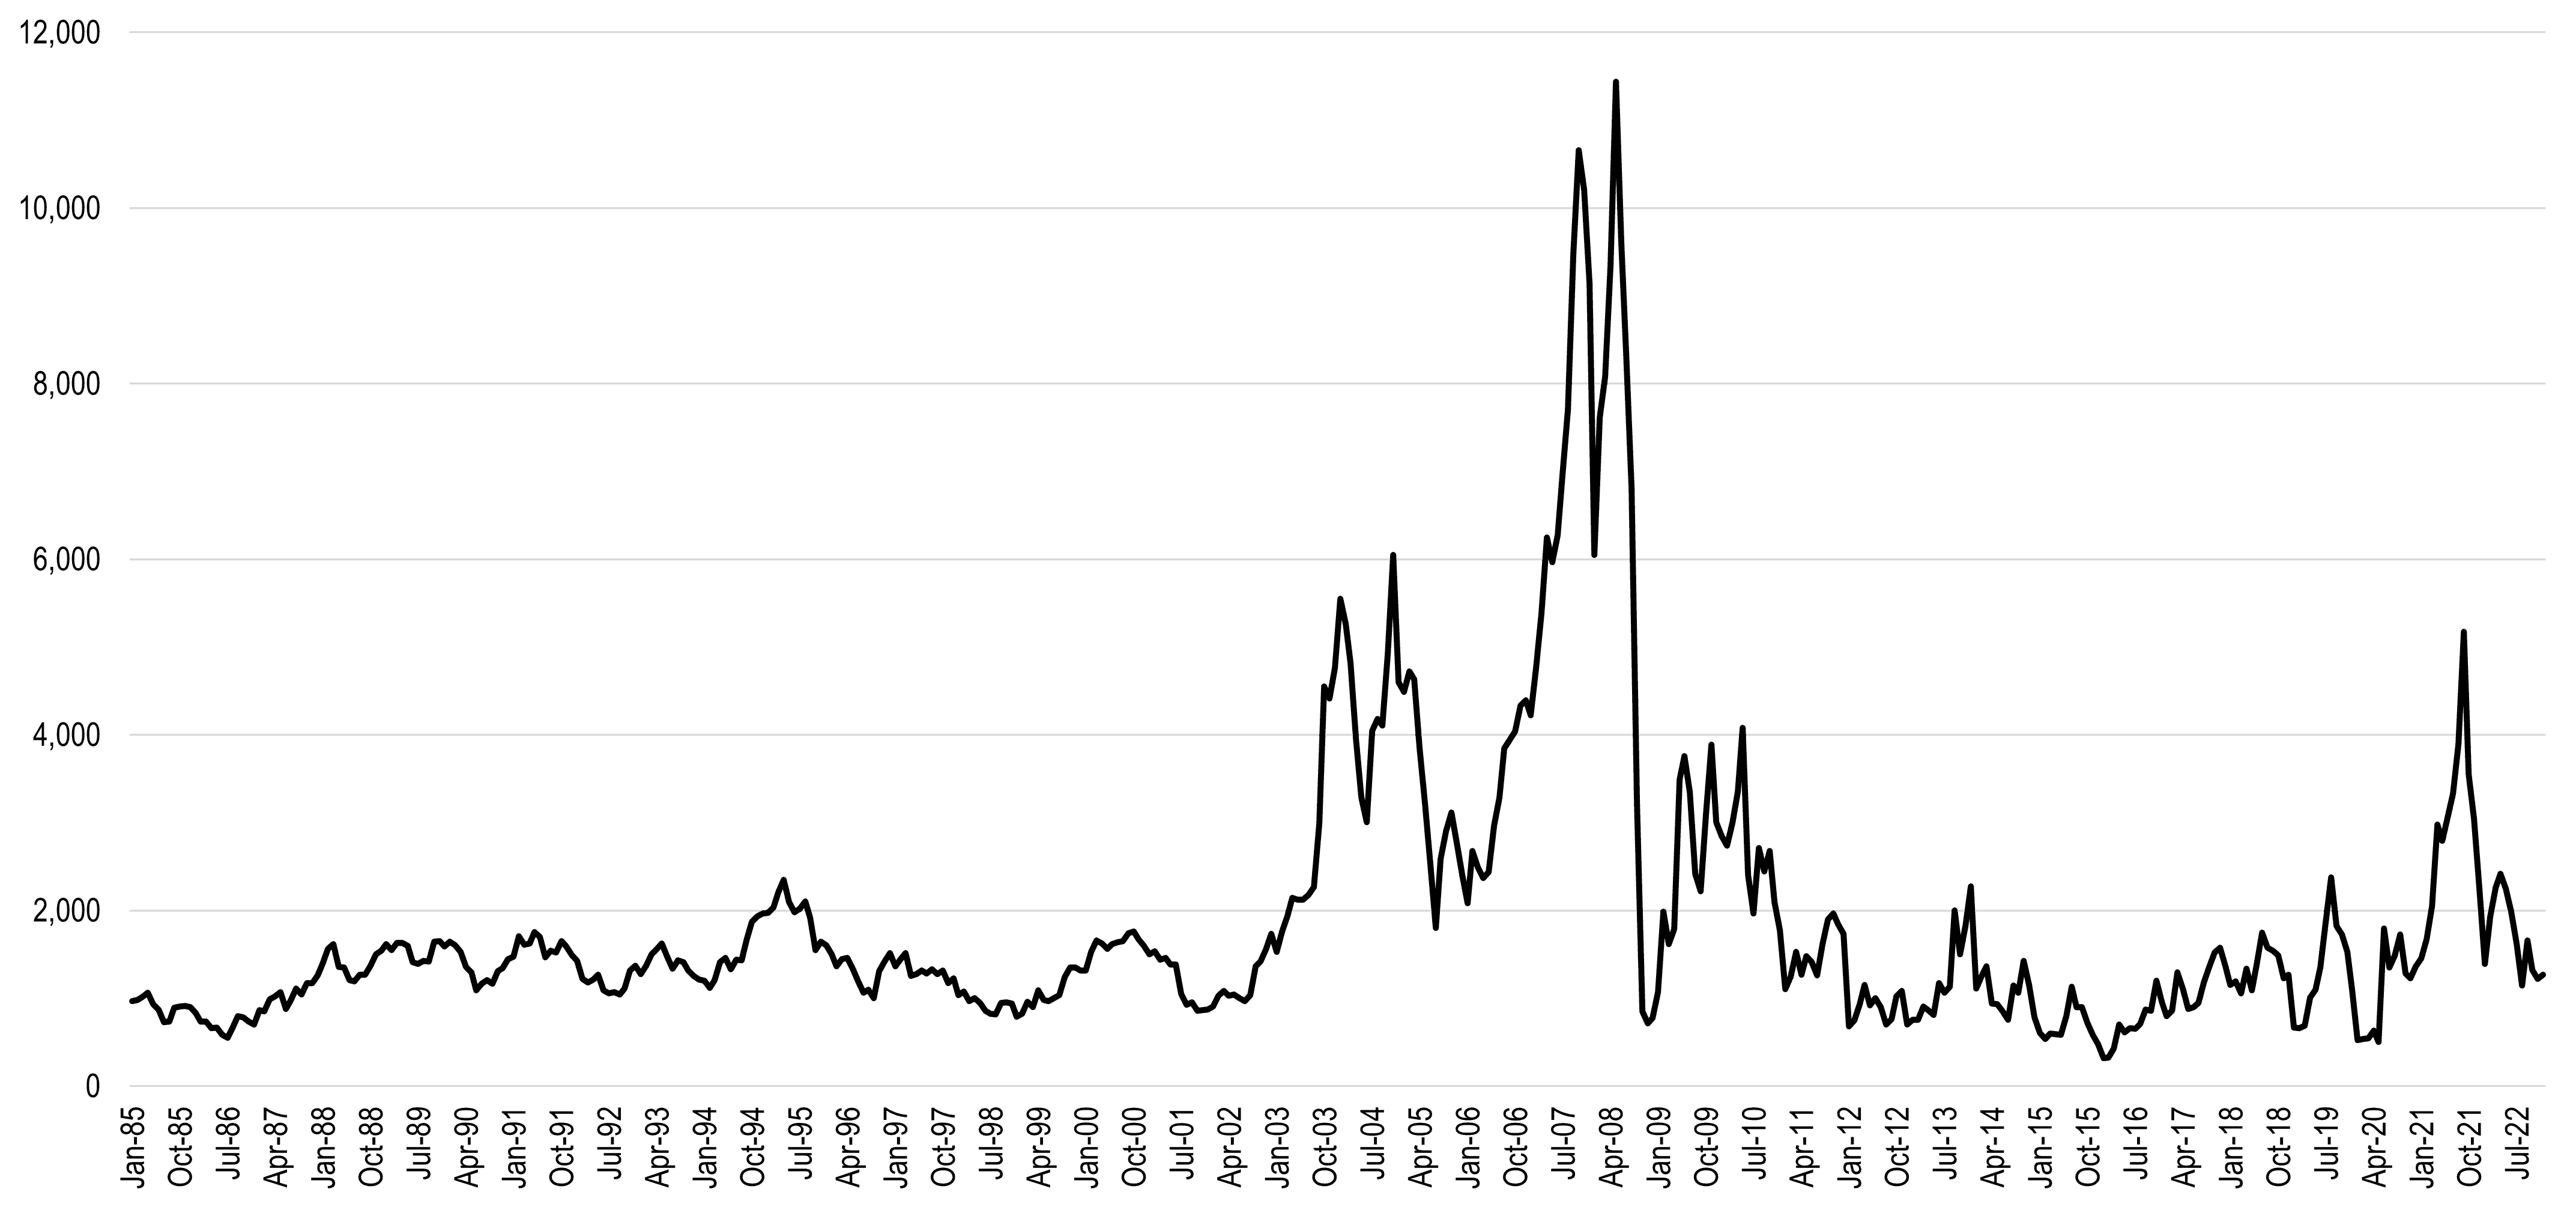 Historical Chart Baltic Dry Index